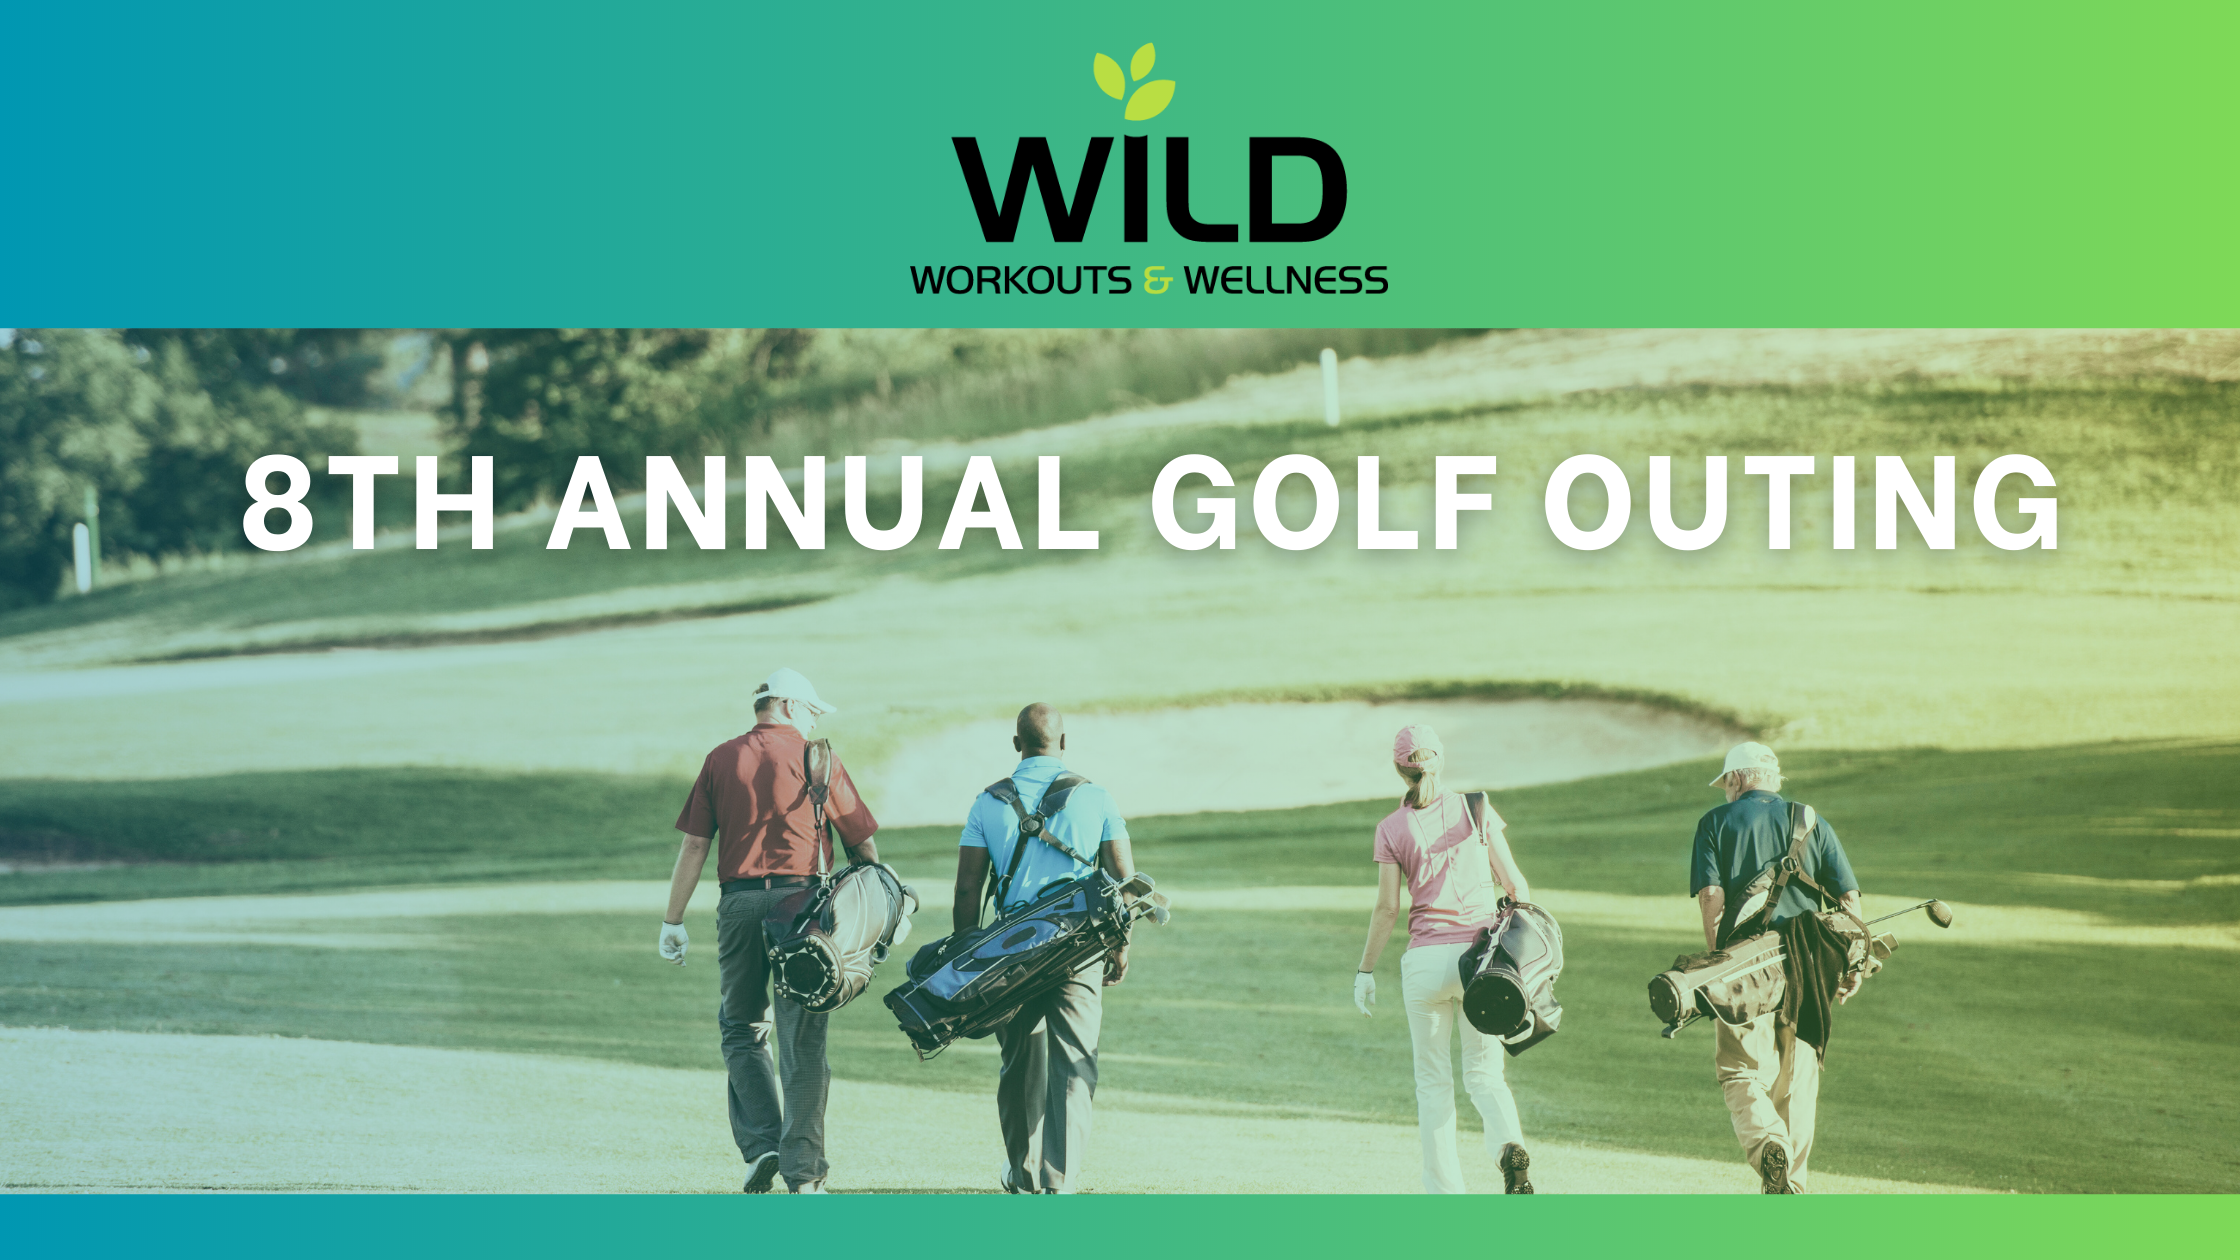 Wild’s 8th Annual Golf Outing